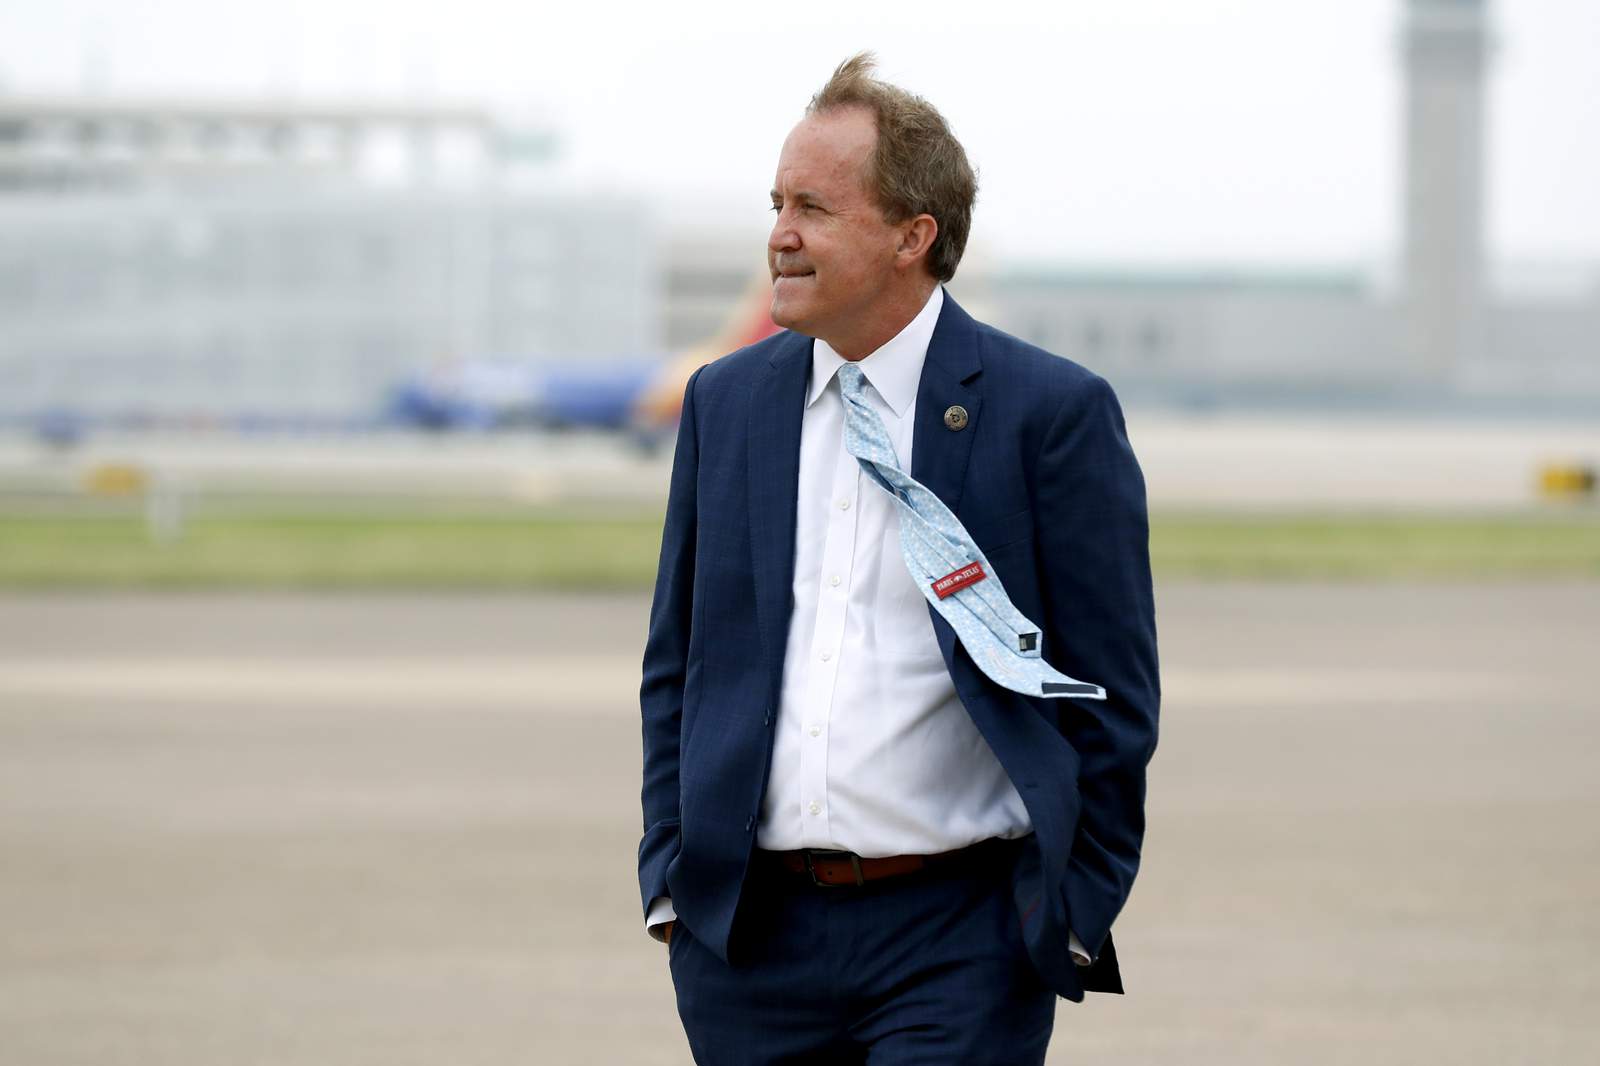 Texas Attorney General Ken Paxton’s affair tied to criminal allegations, AP sources say